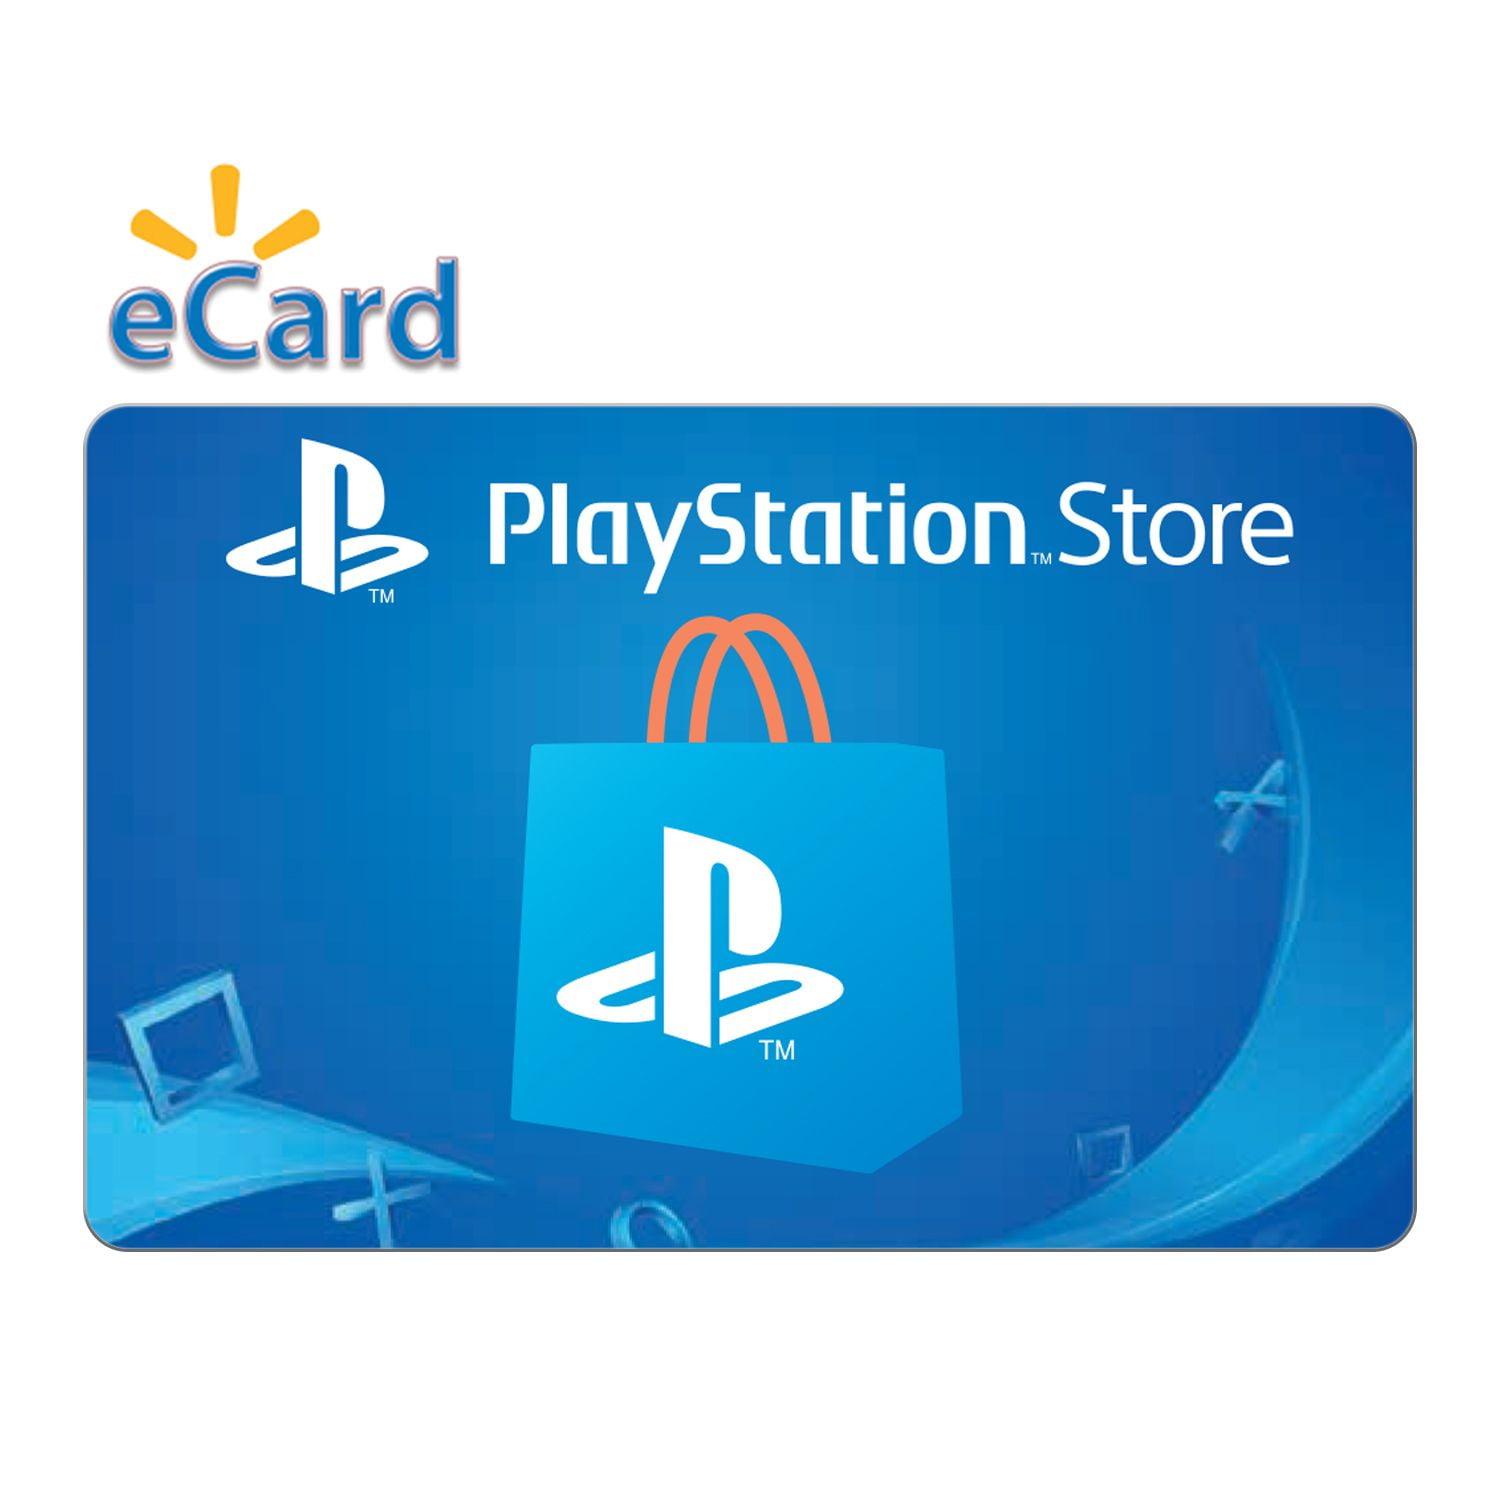 $10 playstation store gift card